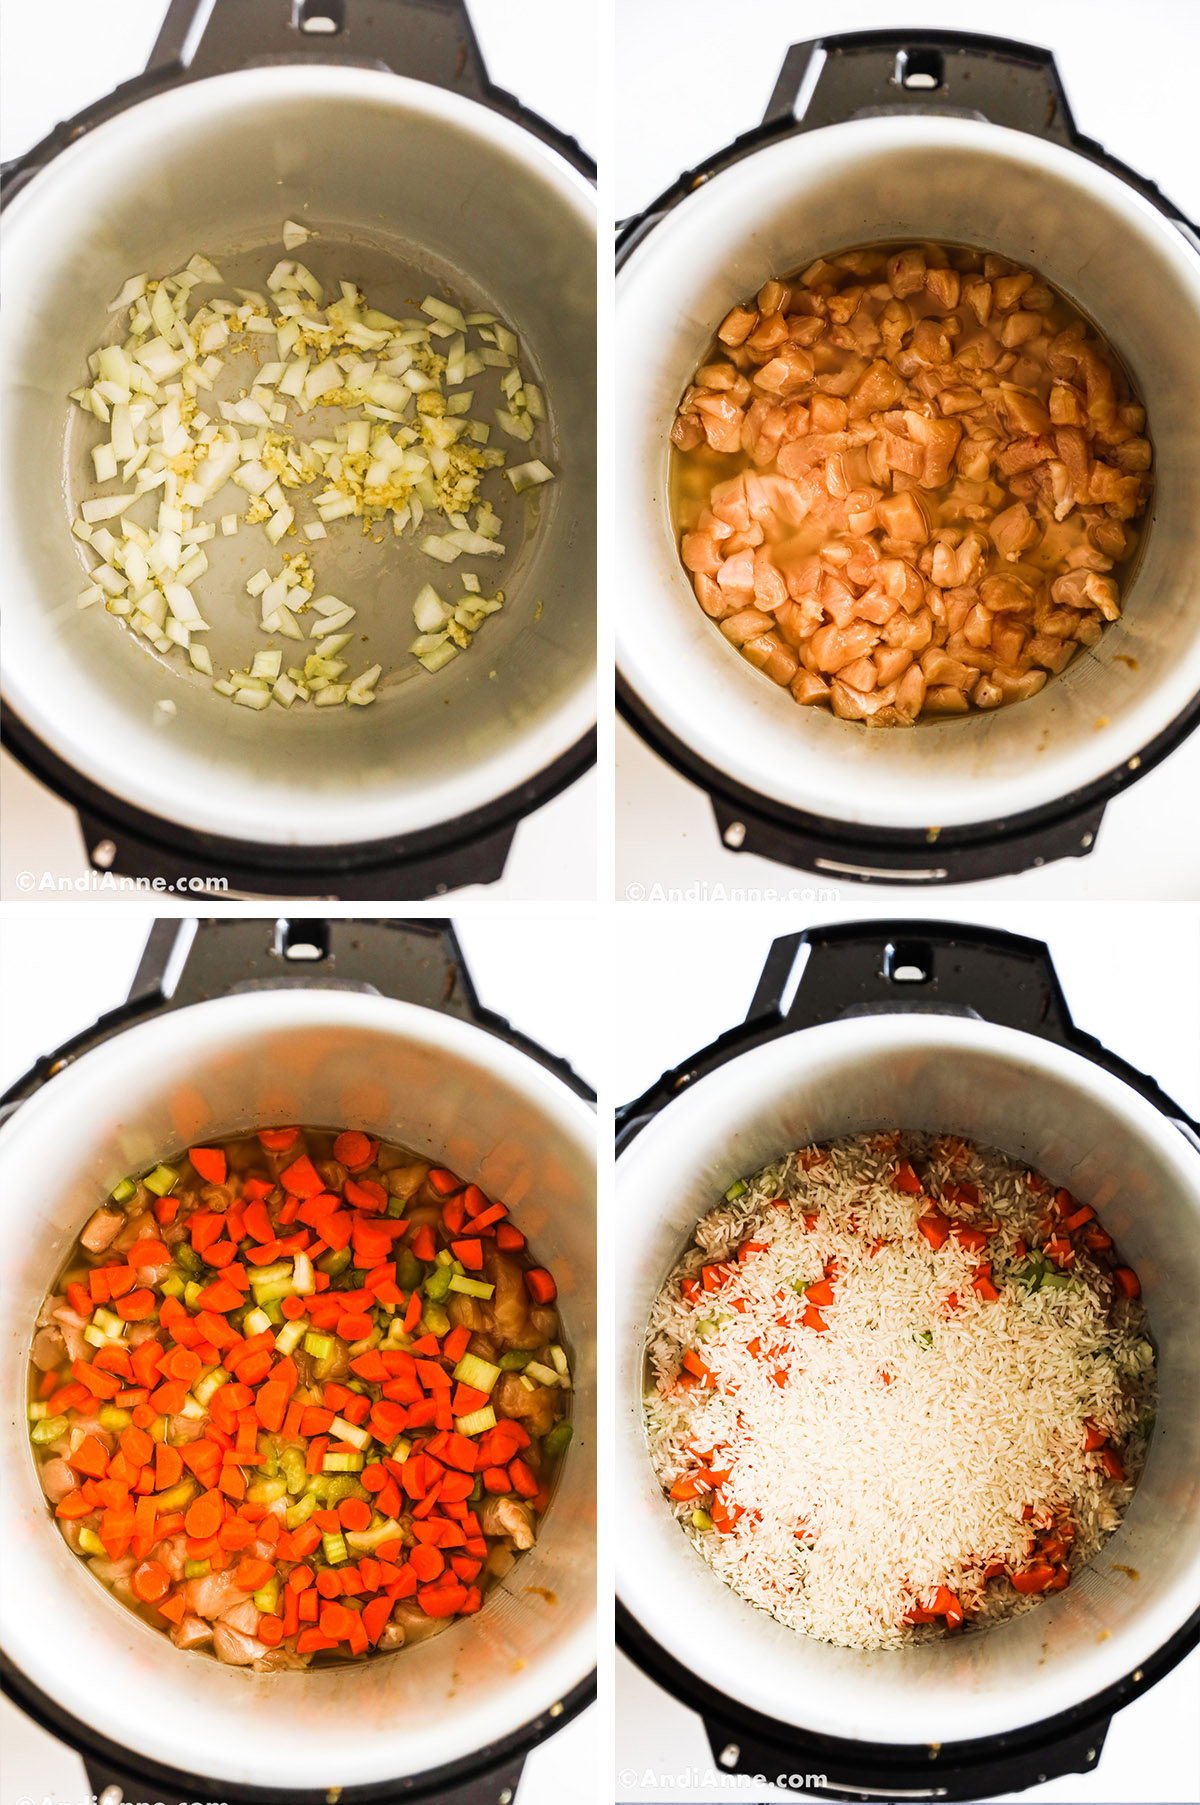 Four images looking into an instant pot with various ingredients including chopped onion, chopped chicken, chopped carrots and celery, and white rice.